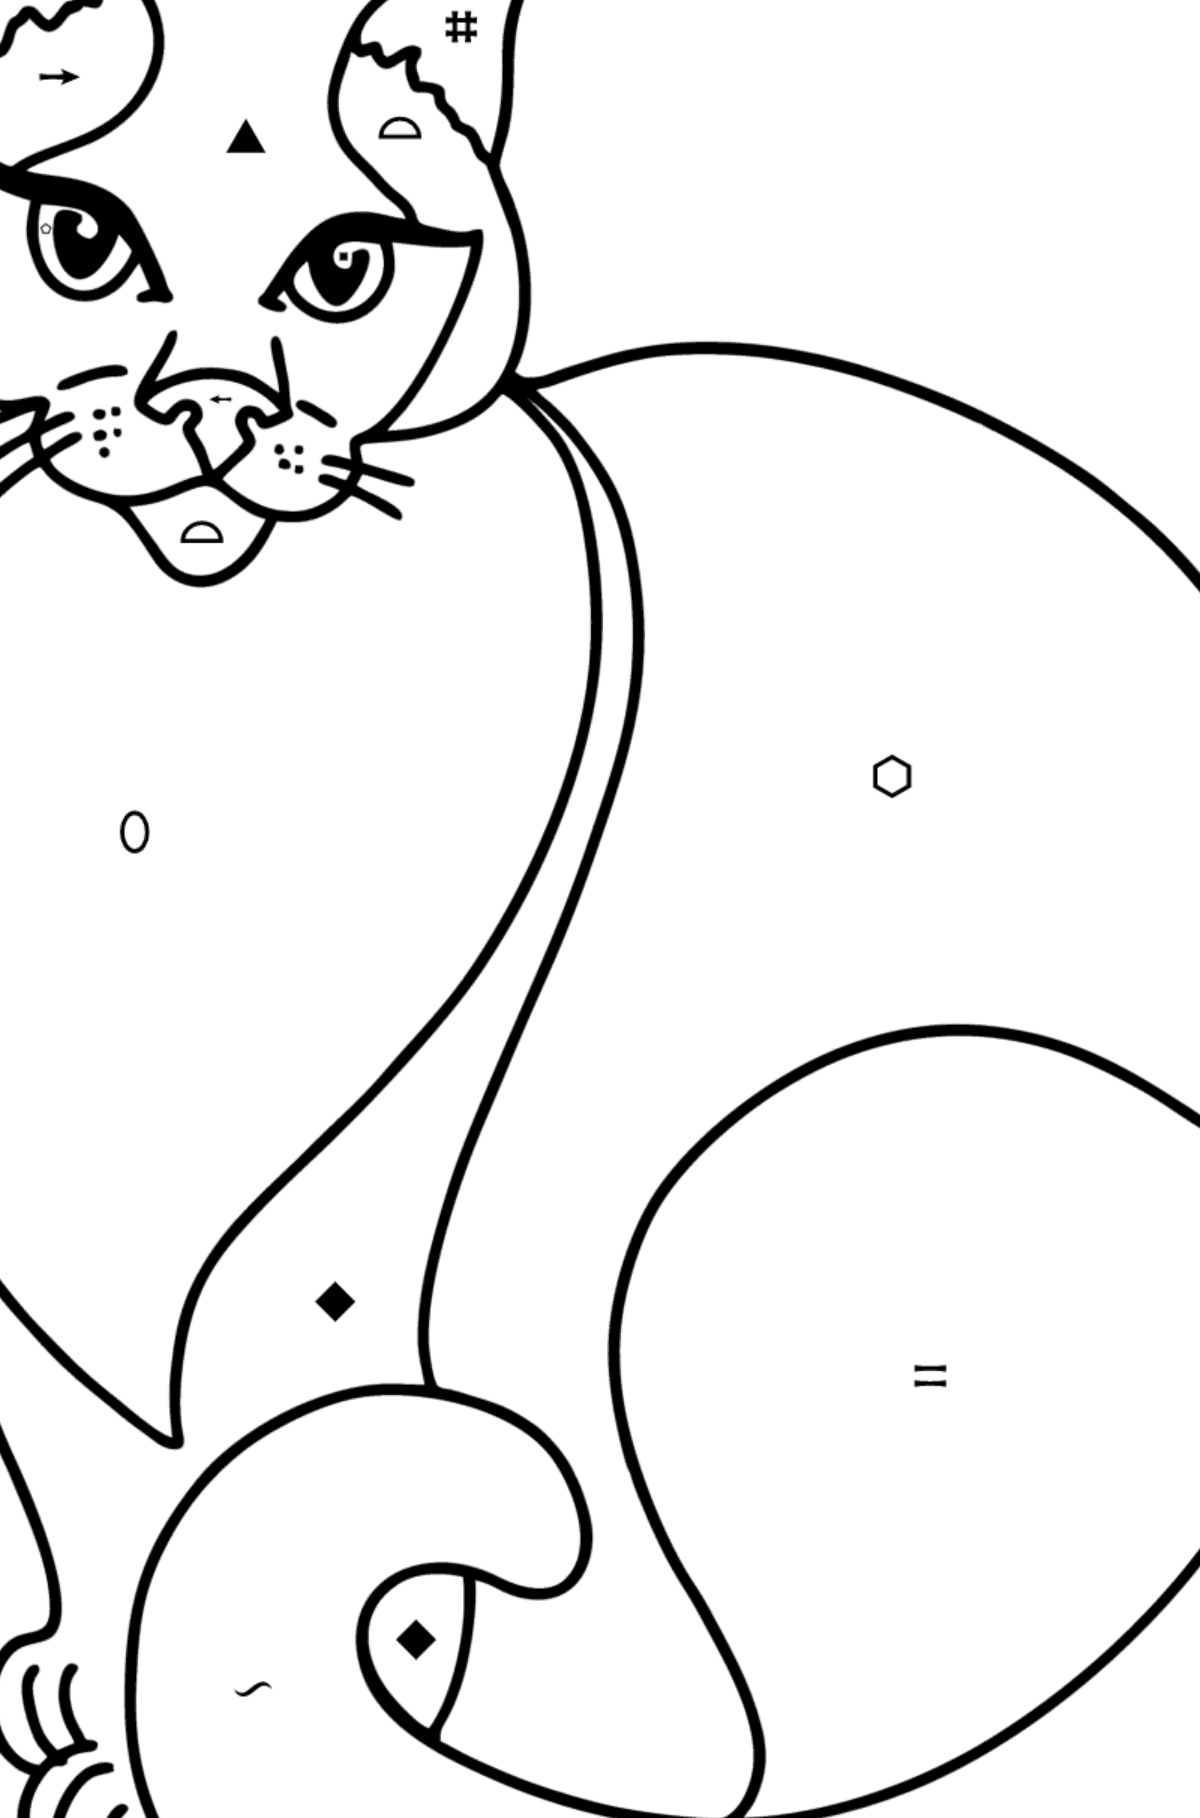 Siamese Cat coloring page - Coloring by Symbols and Geometric Shapes for Kids